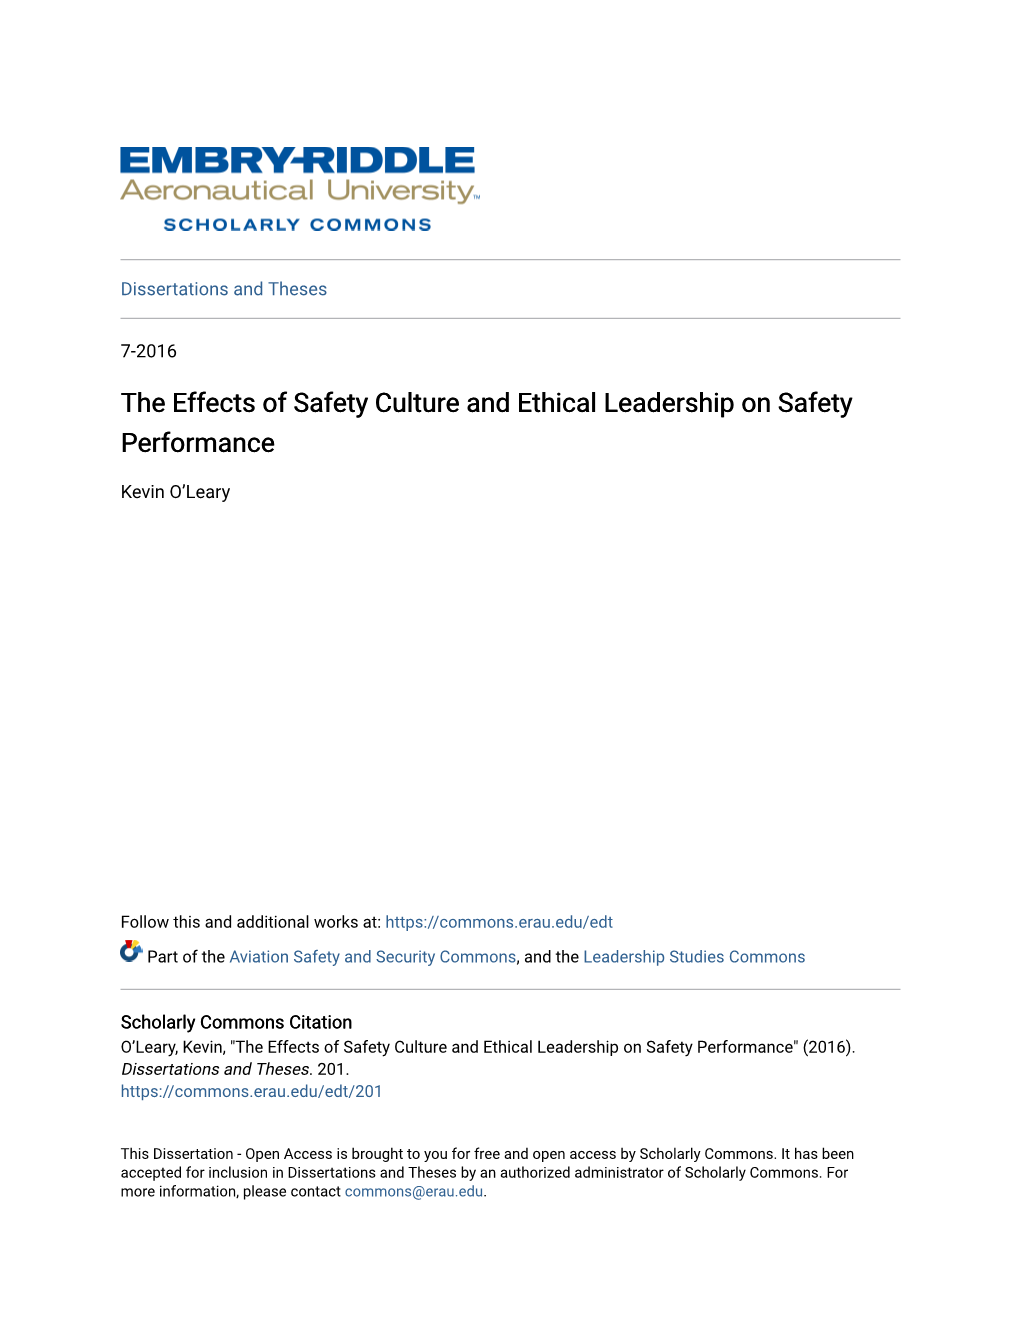 The Effects of Safety Culture and Ethical Leadership on Safety Performance